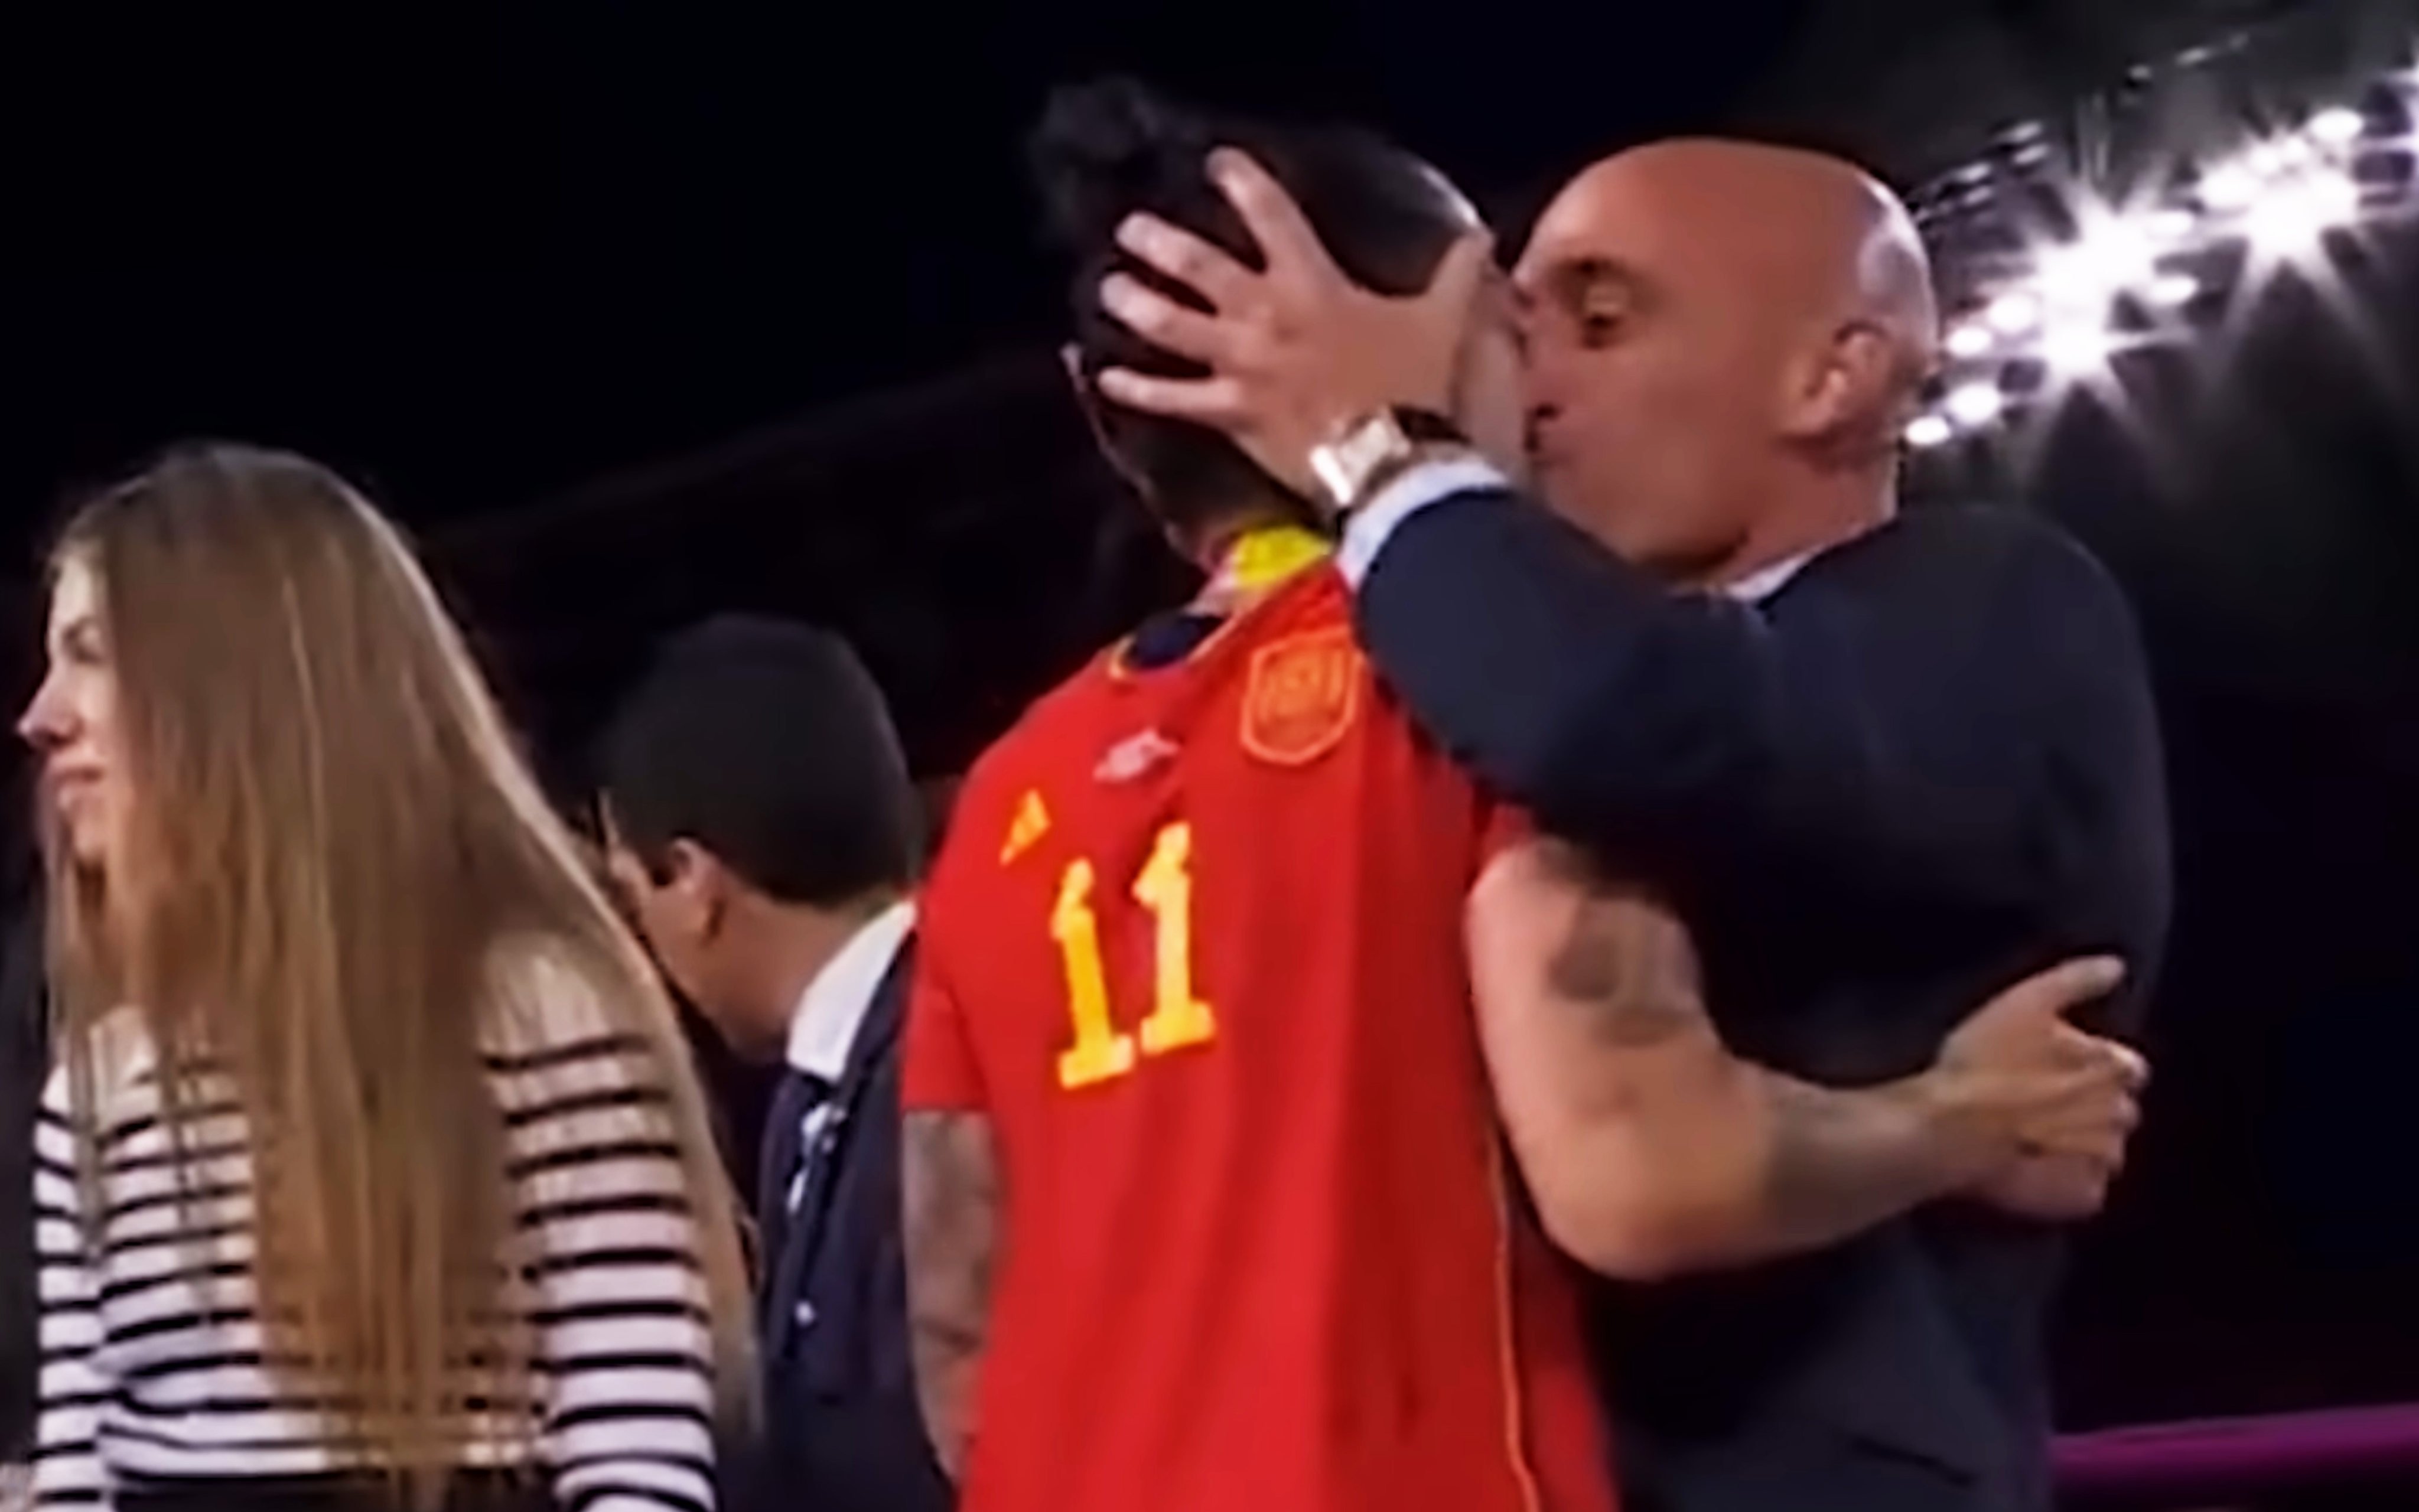 The president of the Spanish football federation, Luis Rubiales will face trial for kissing forward Jenni Hermoso without her consent at the Women’s World Cup. Photo: SCMPOST